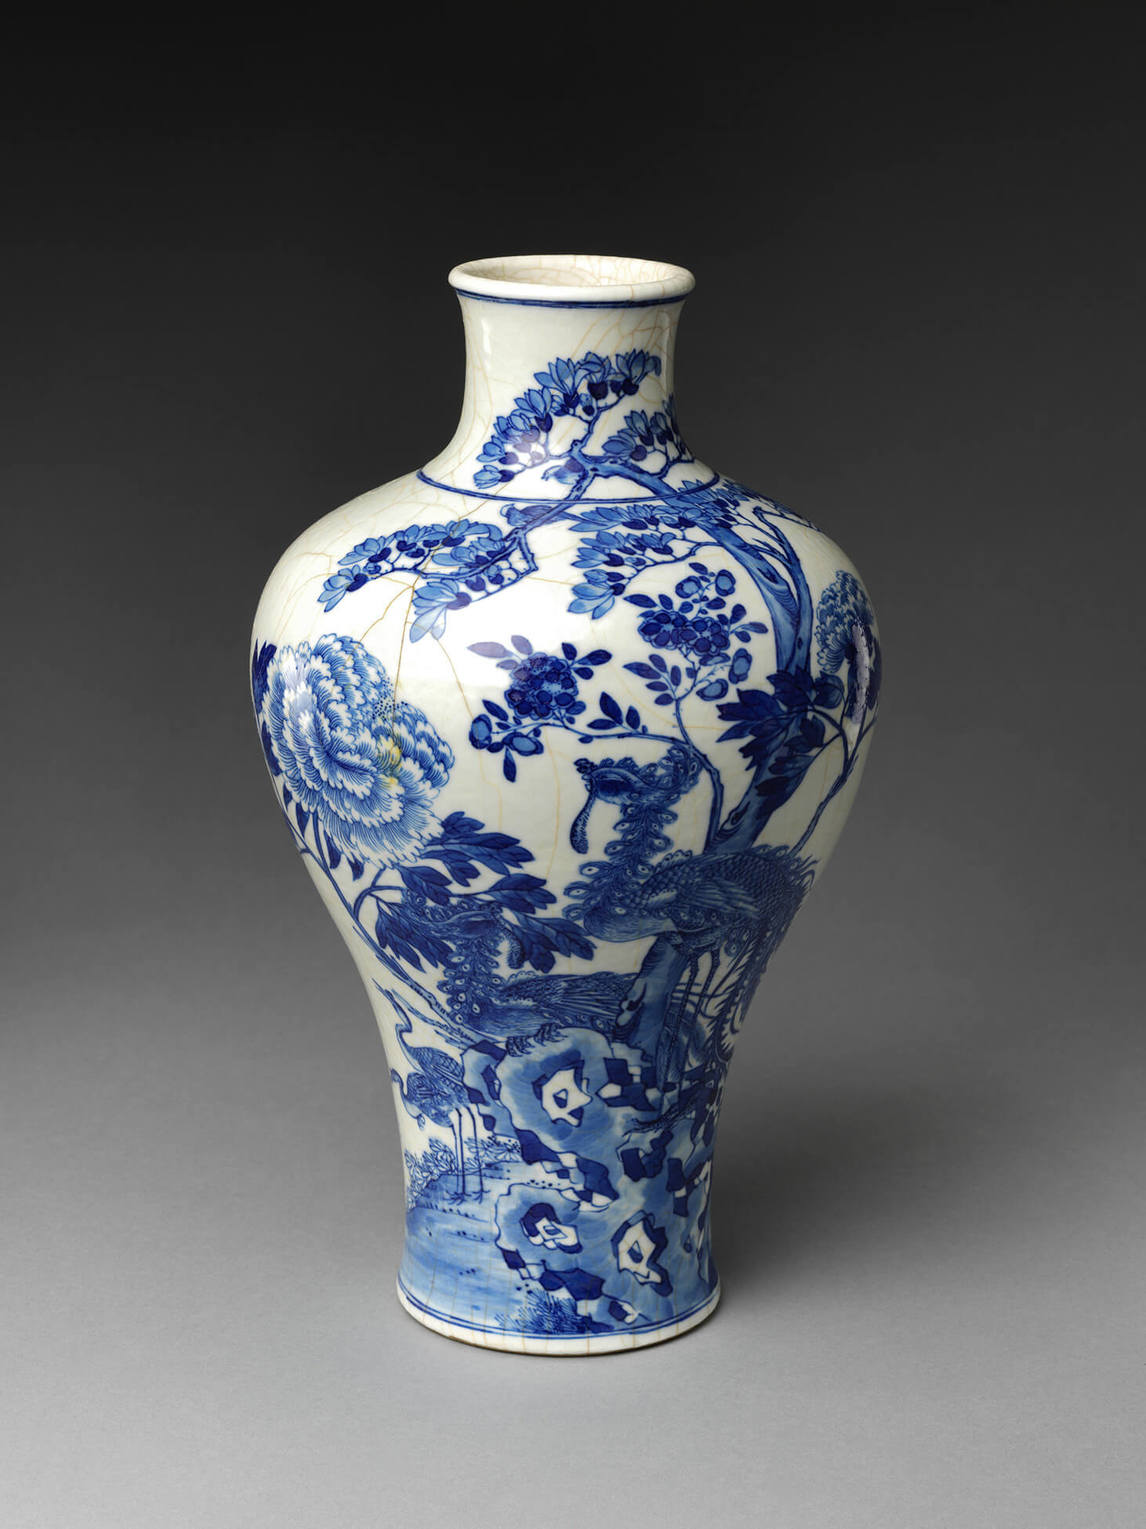 Vase with Auspicious Animals, Qing dynasty (1644–1911), Kangxi period (1662–1722)